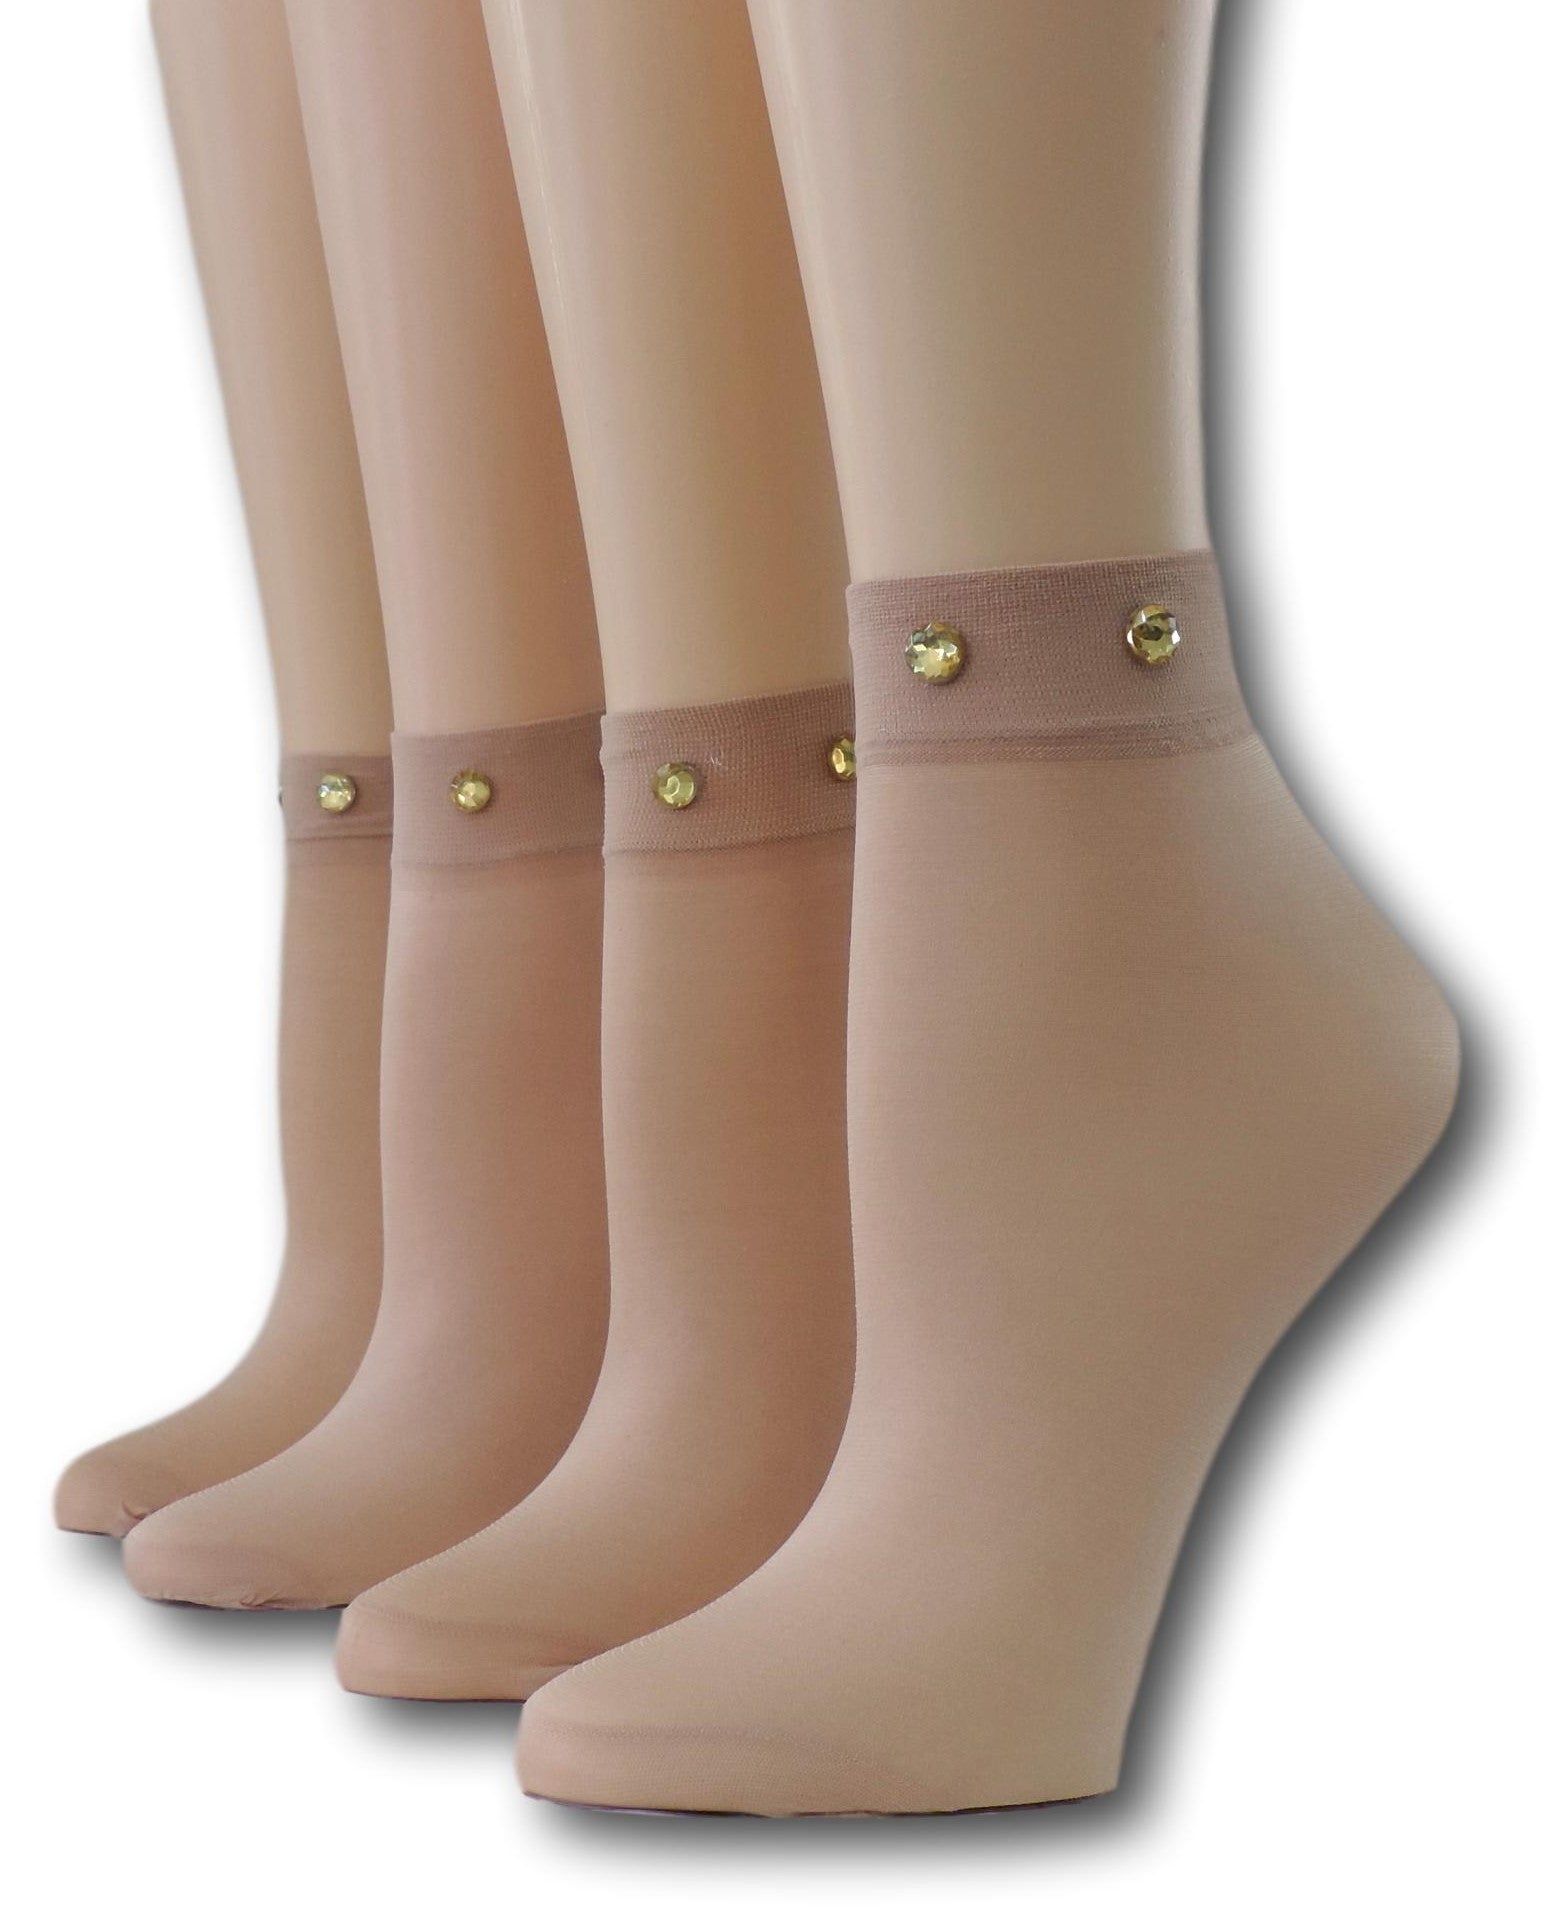 Cute Brown Nylon Socks with beads (Pack of 10 pairs)